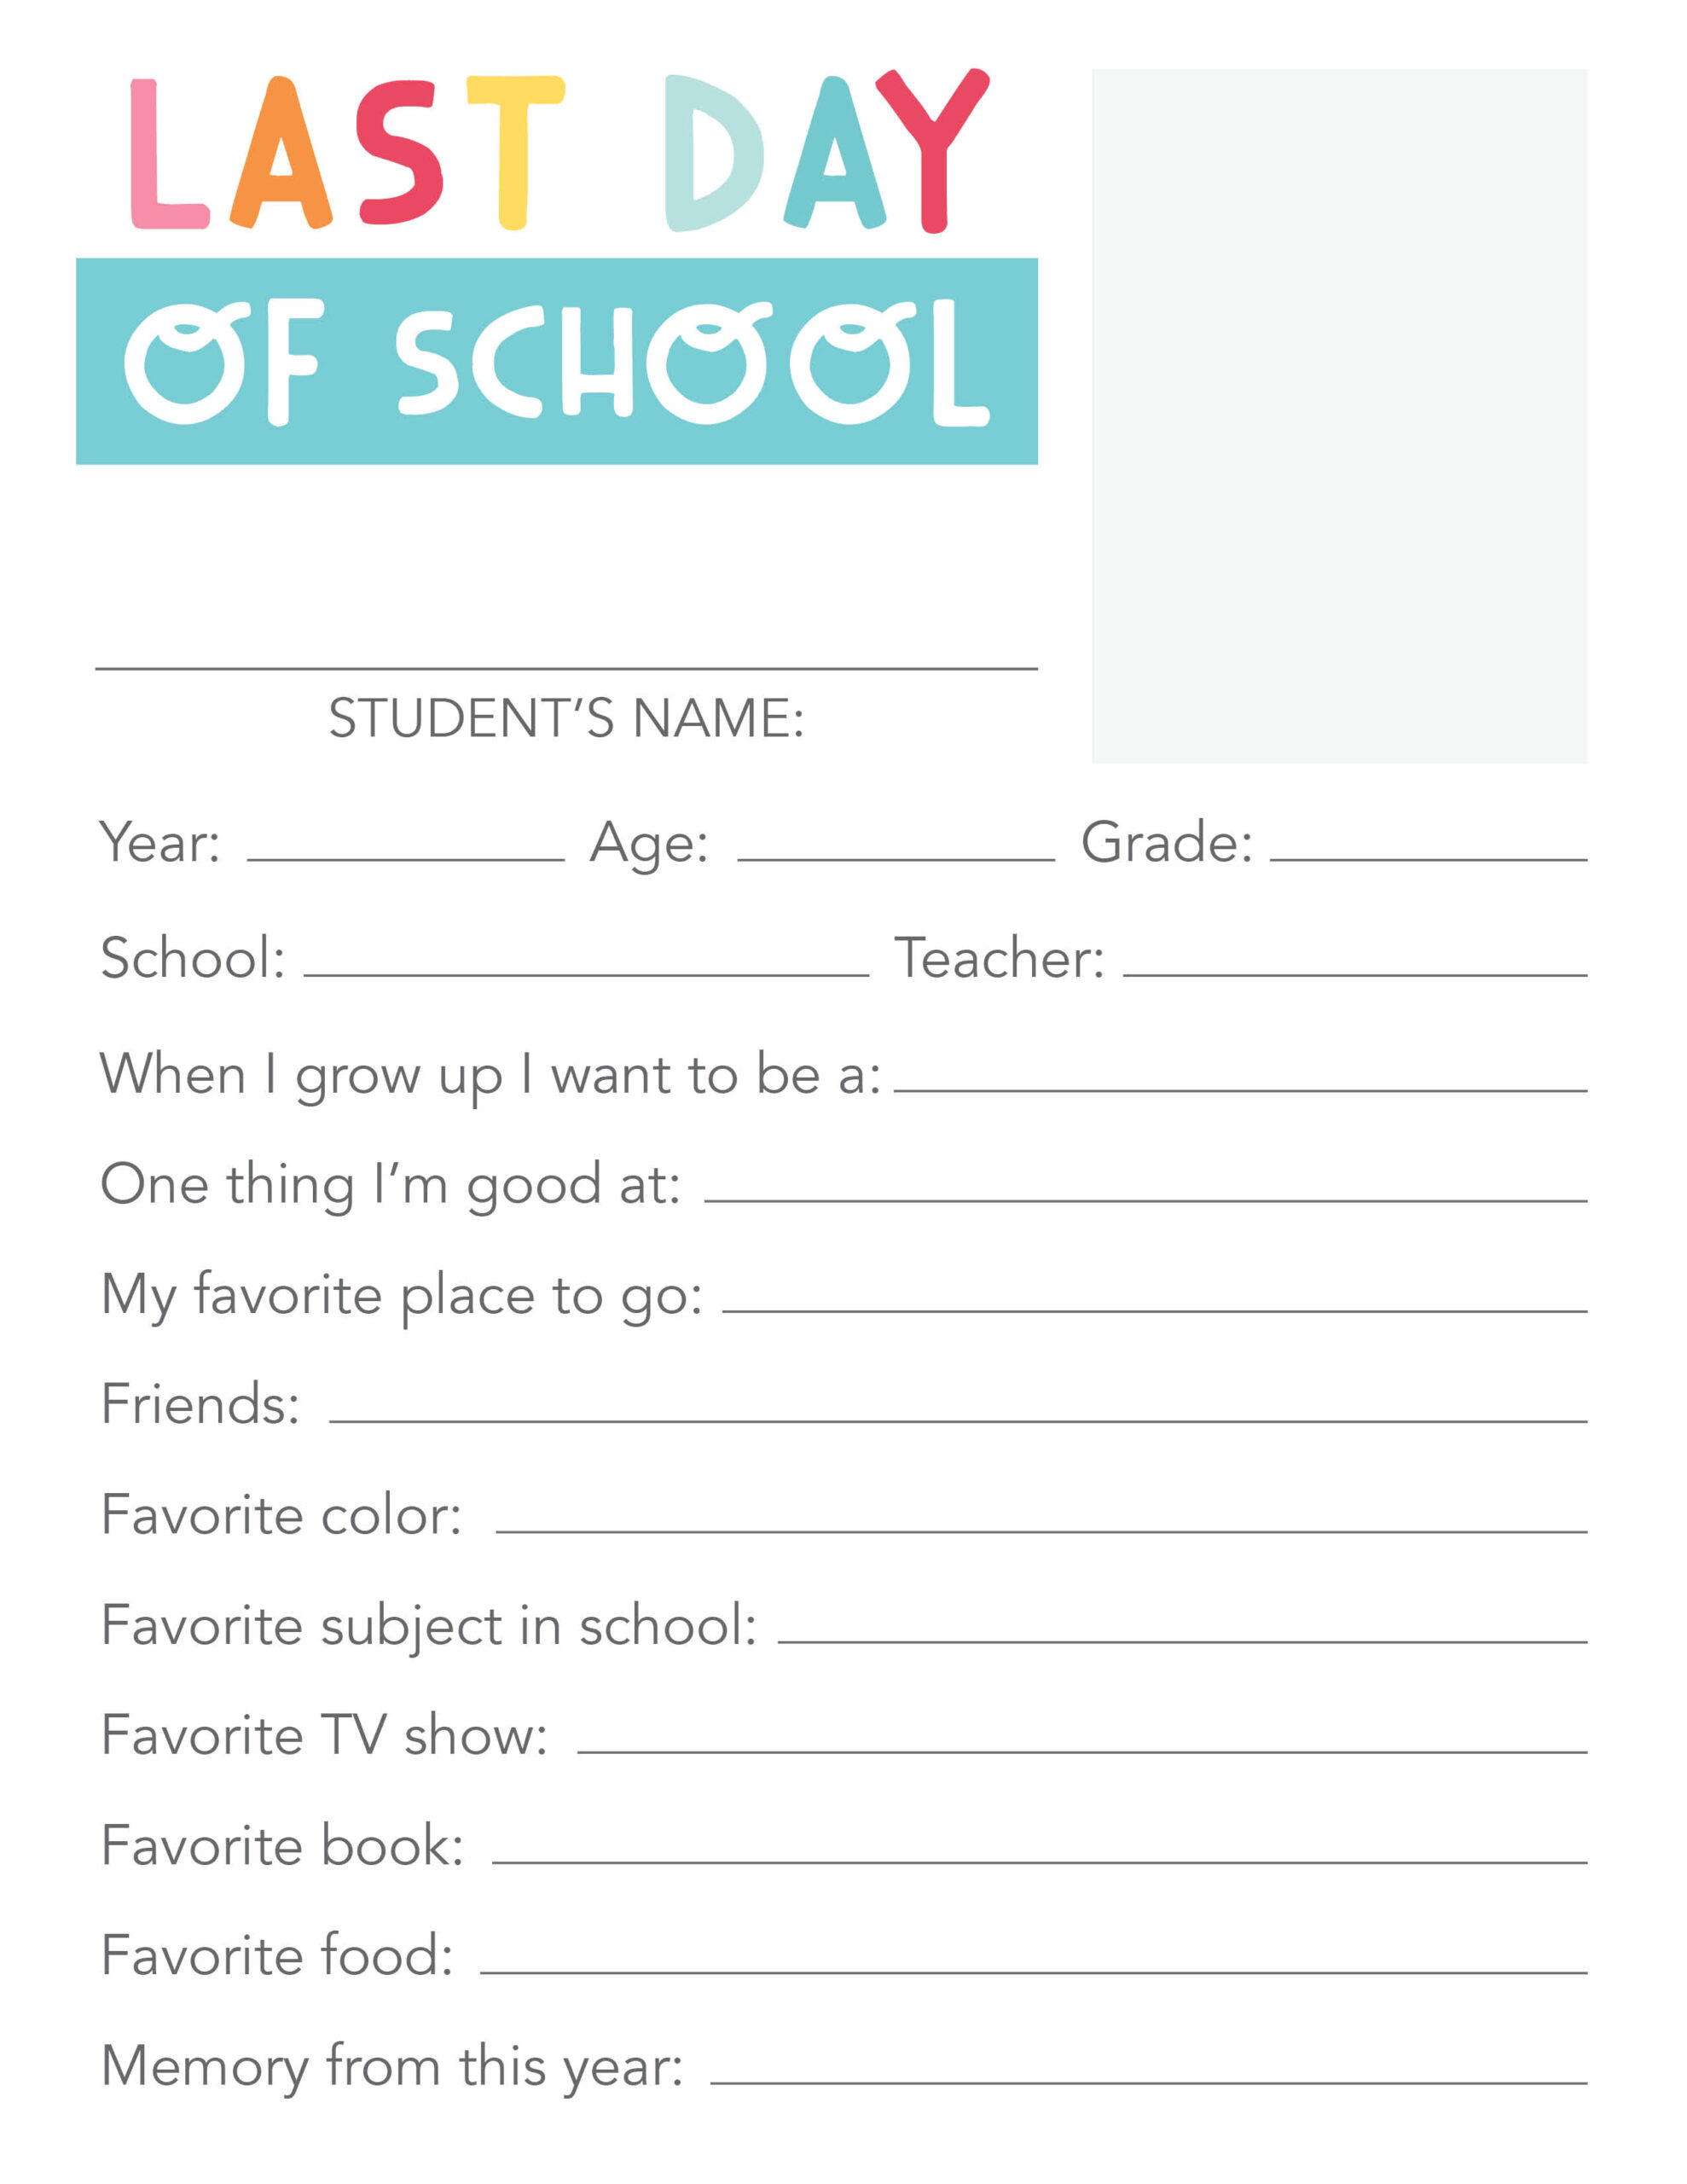 first-day-last-day-of-school-questionnaires-the-inspiration-board